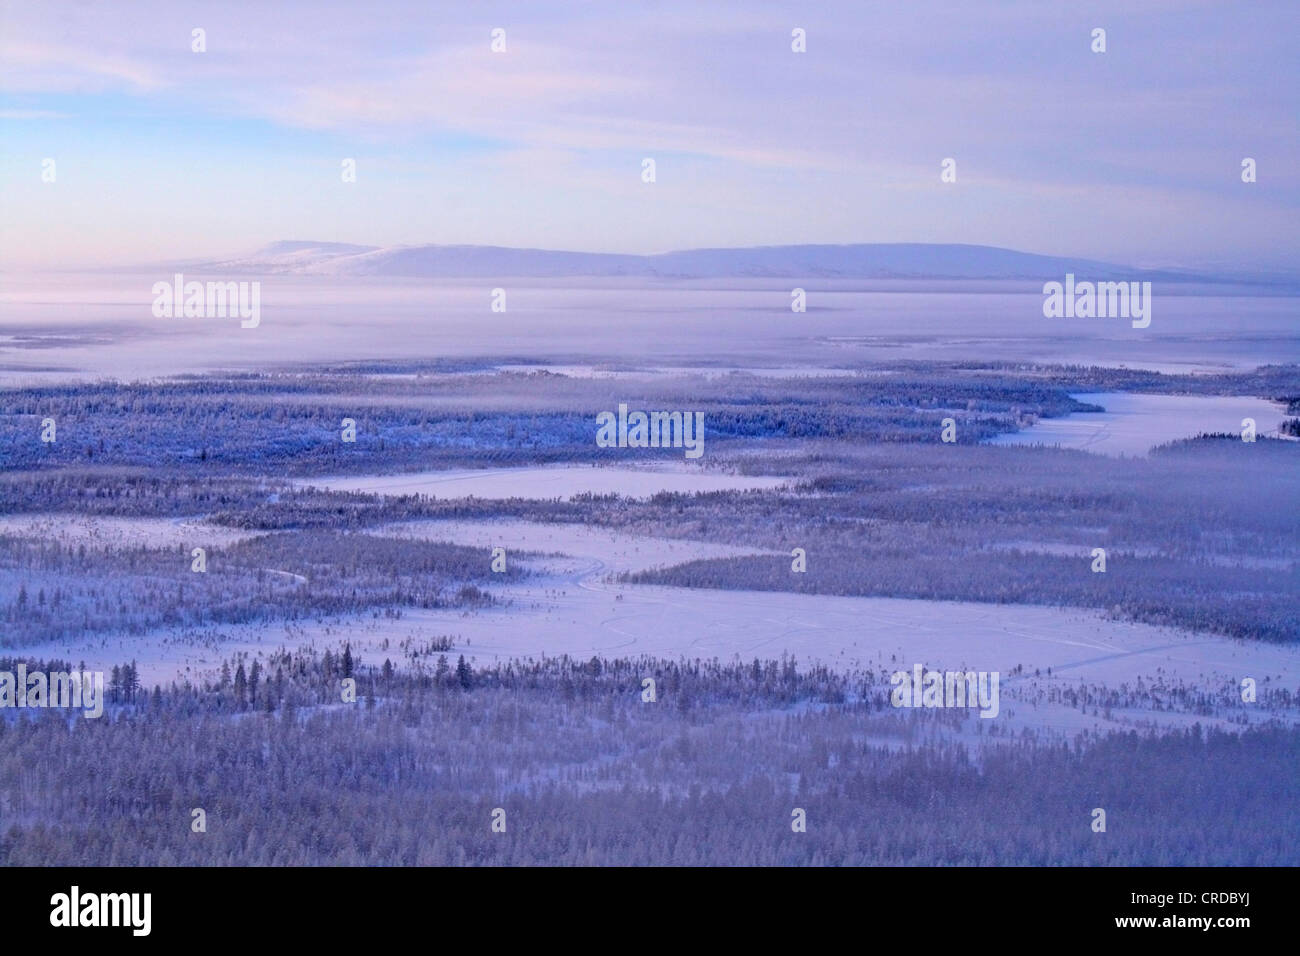 Kittilae photographed from air, Finland, Lapland Stock Photo